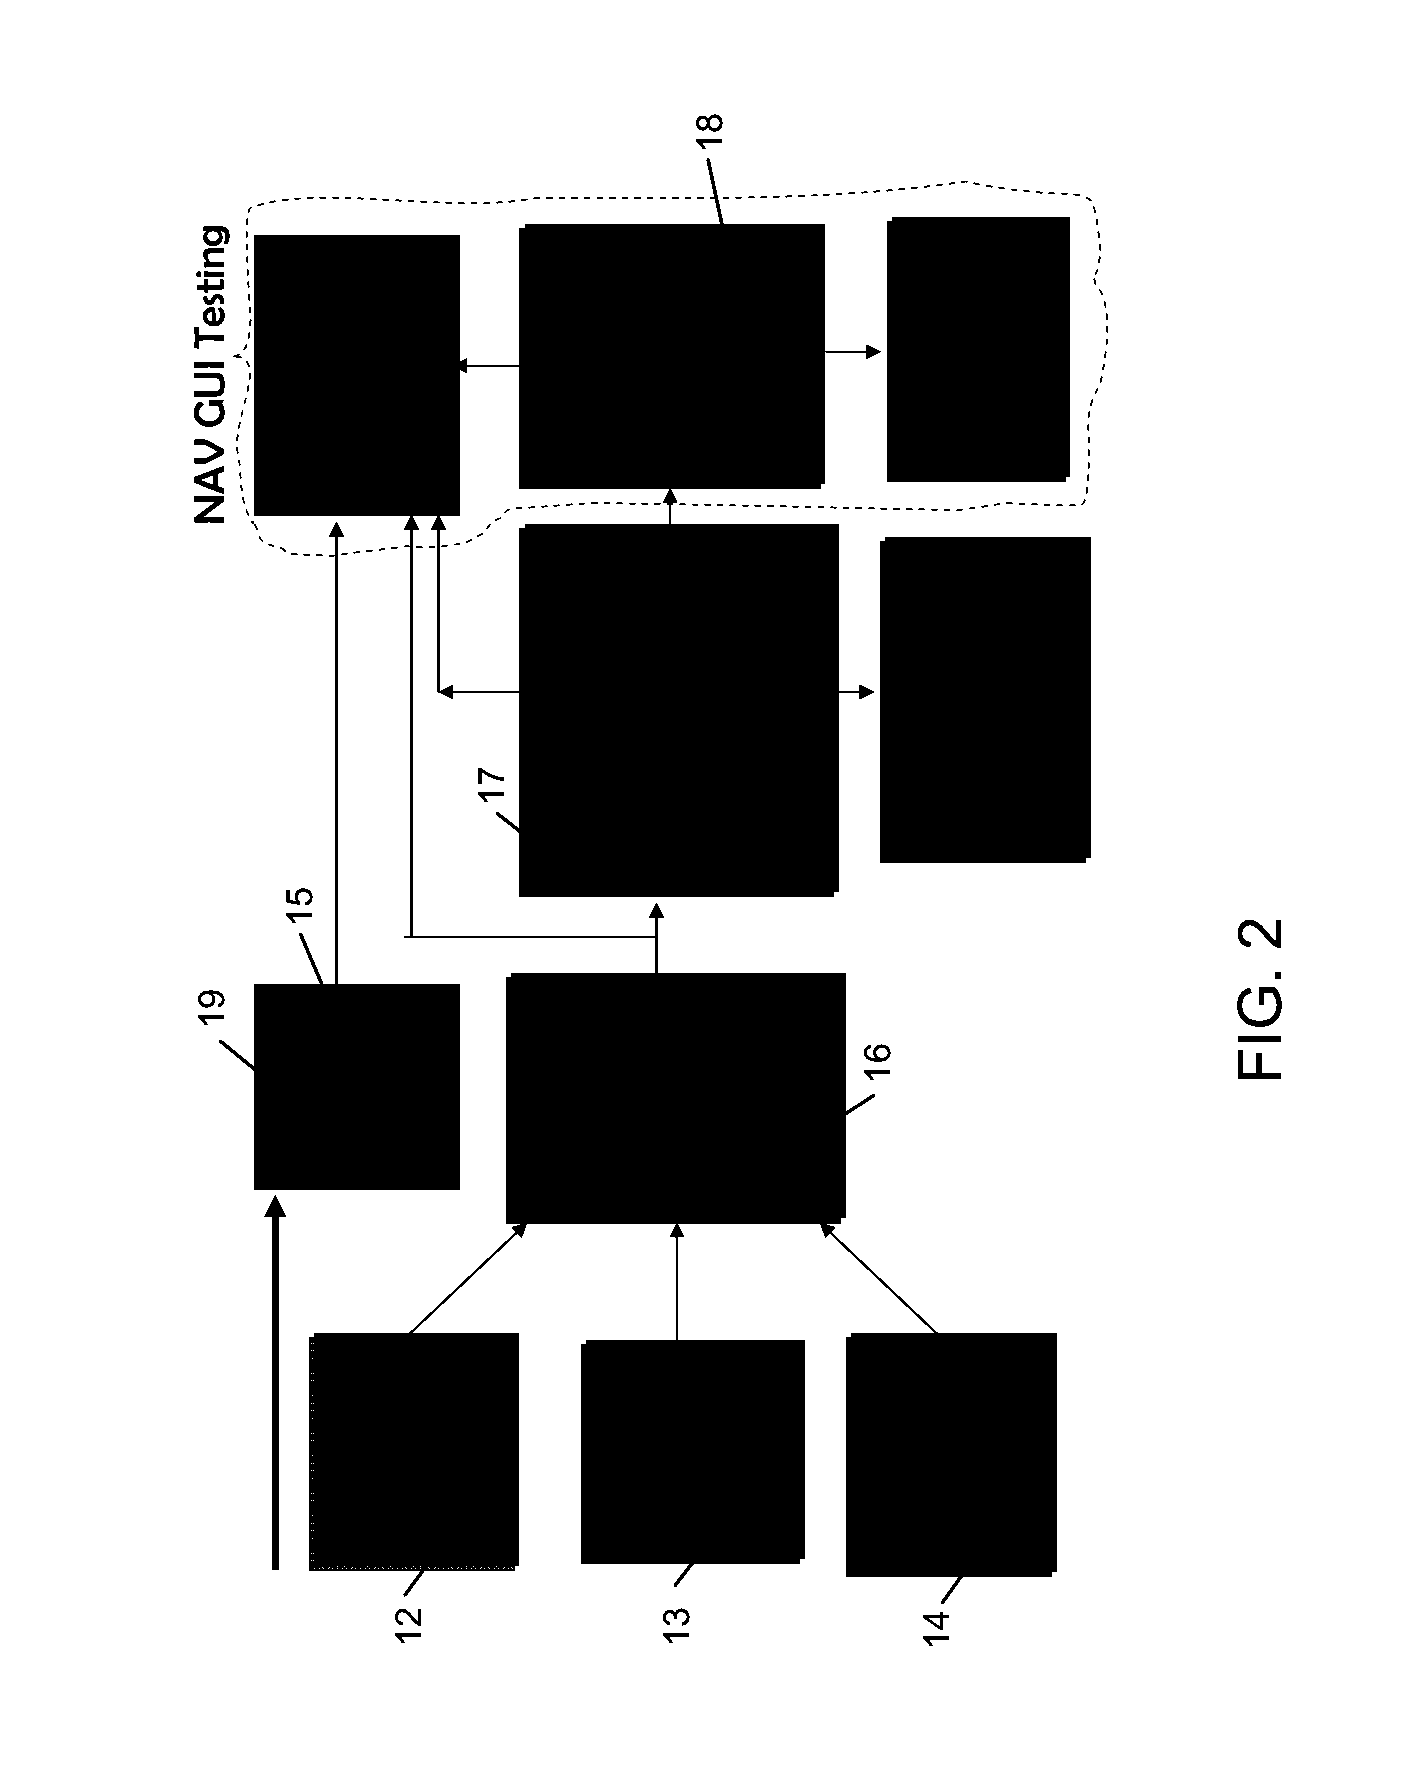 Miniaturized inertial measurement and navigation sensor device and associated methods